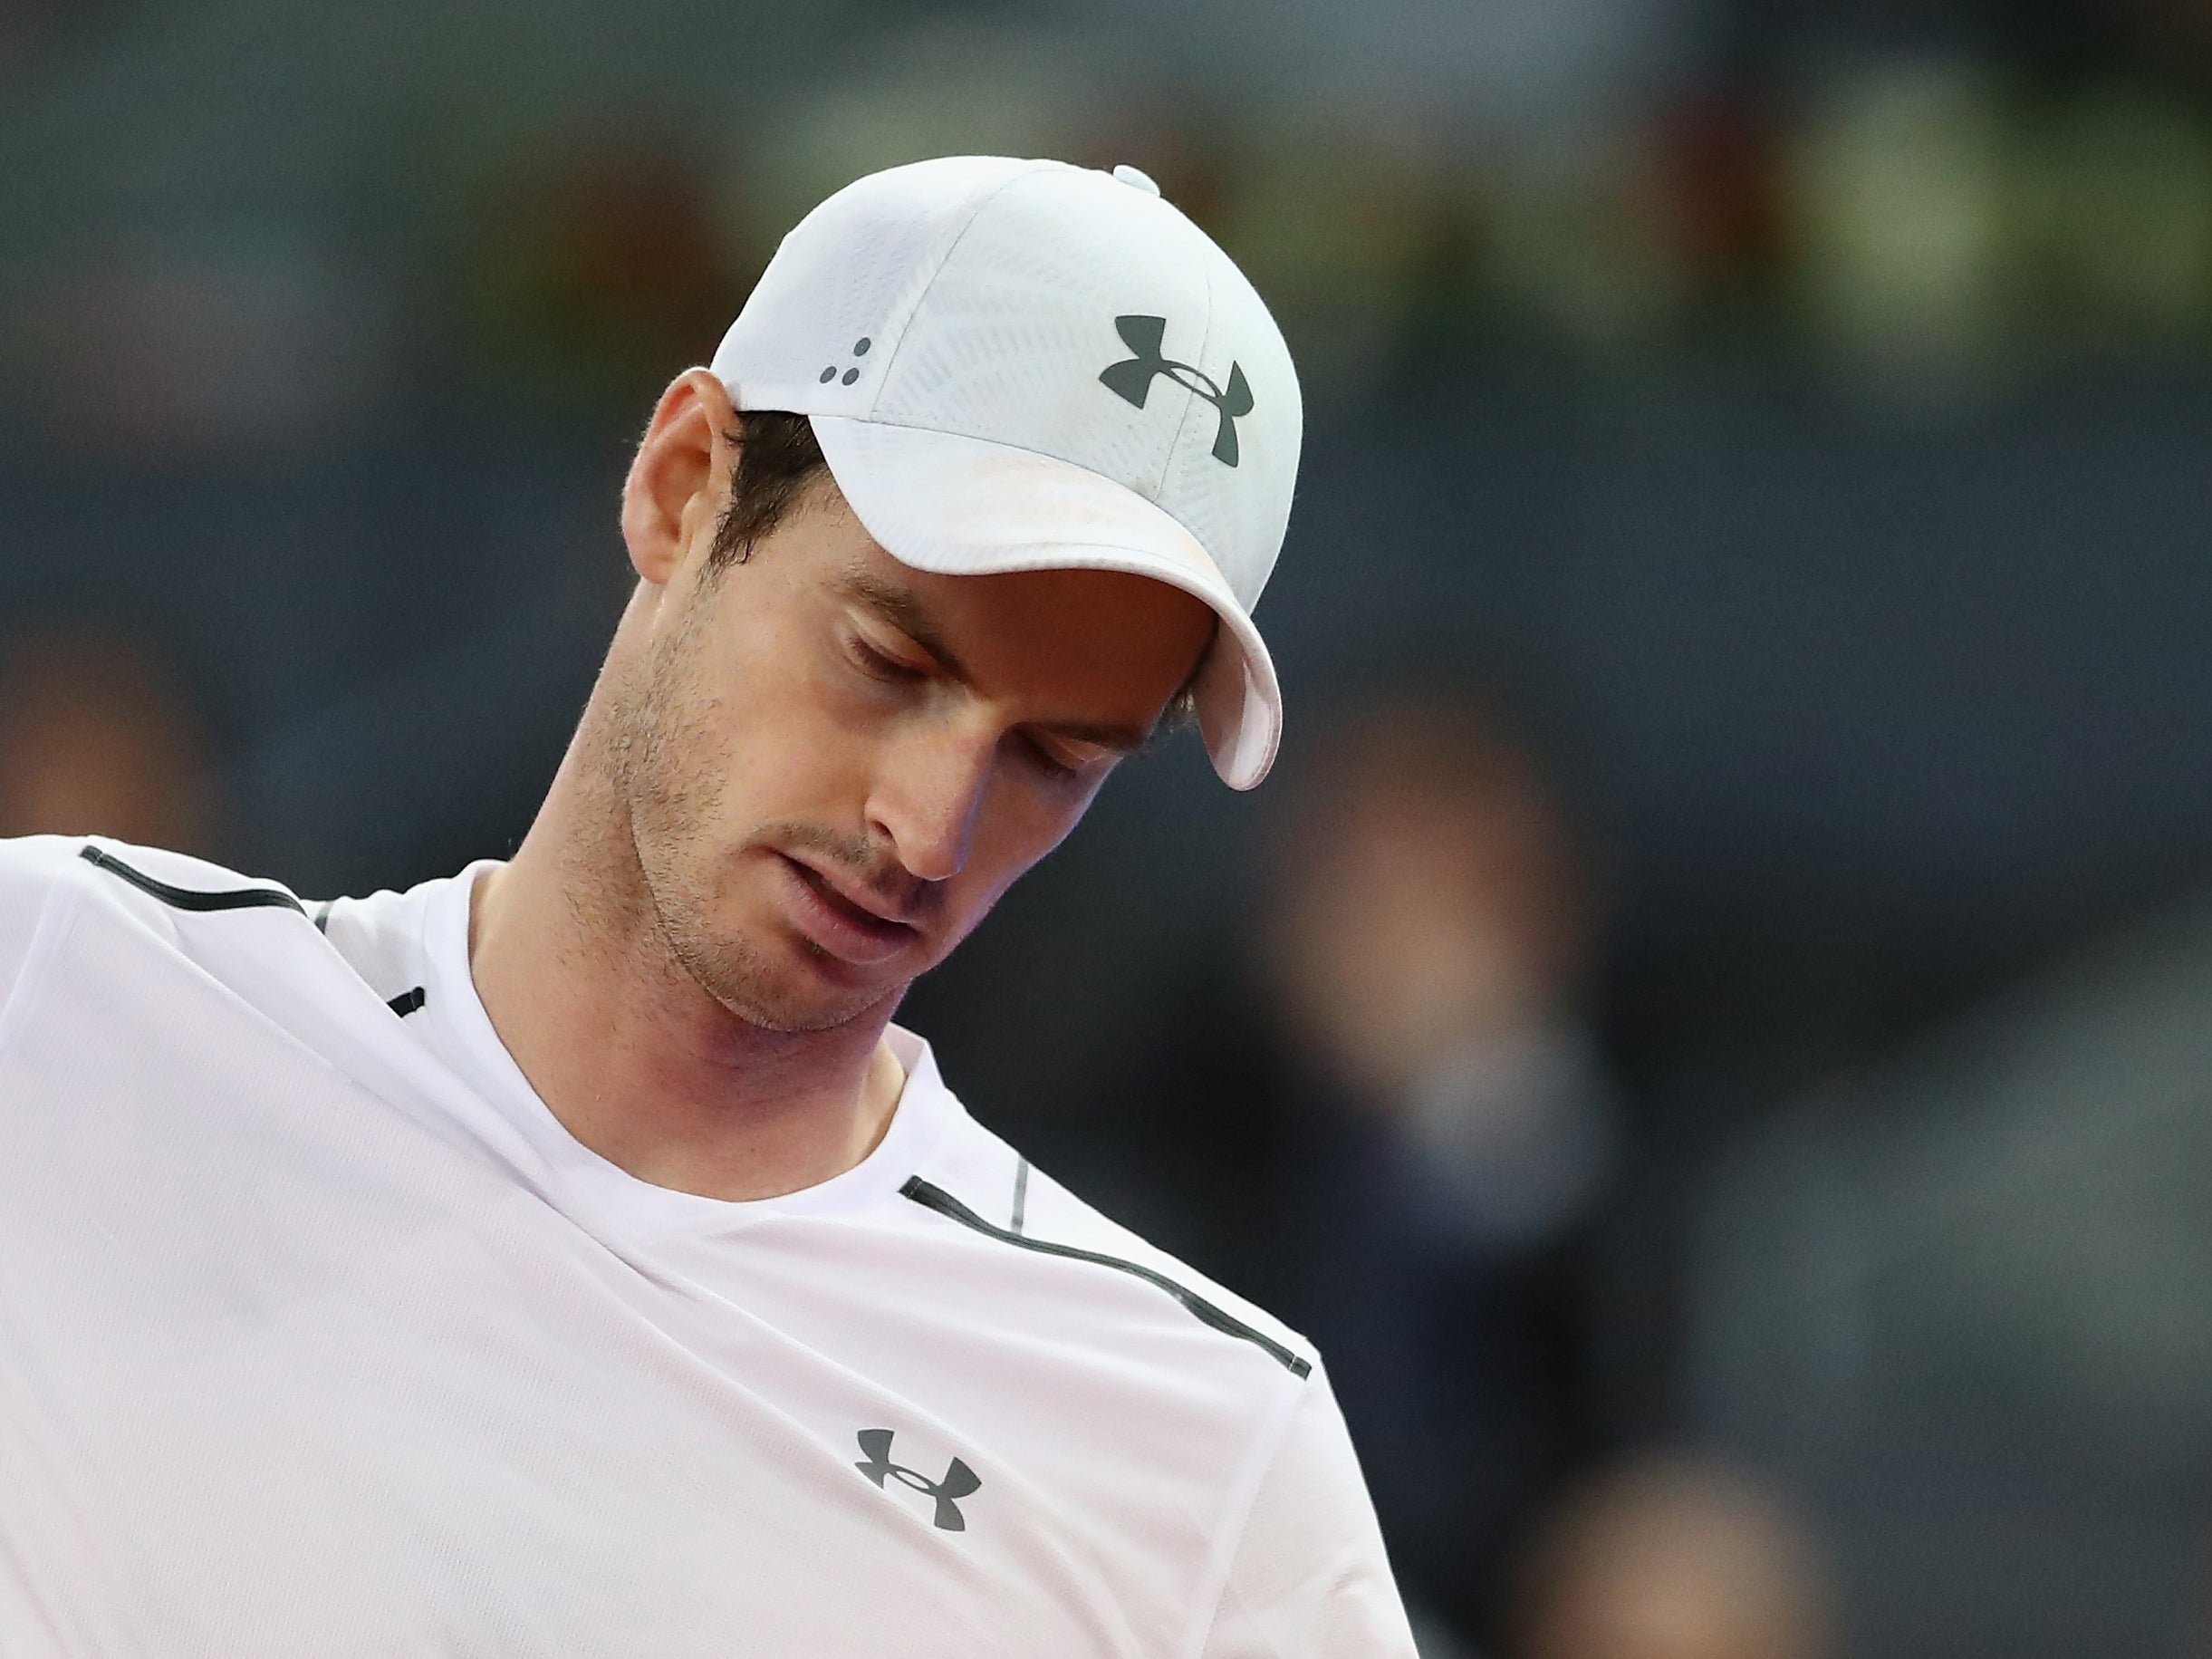 In Madrid, Murray slipped to another unexpected defeat